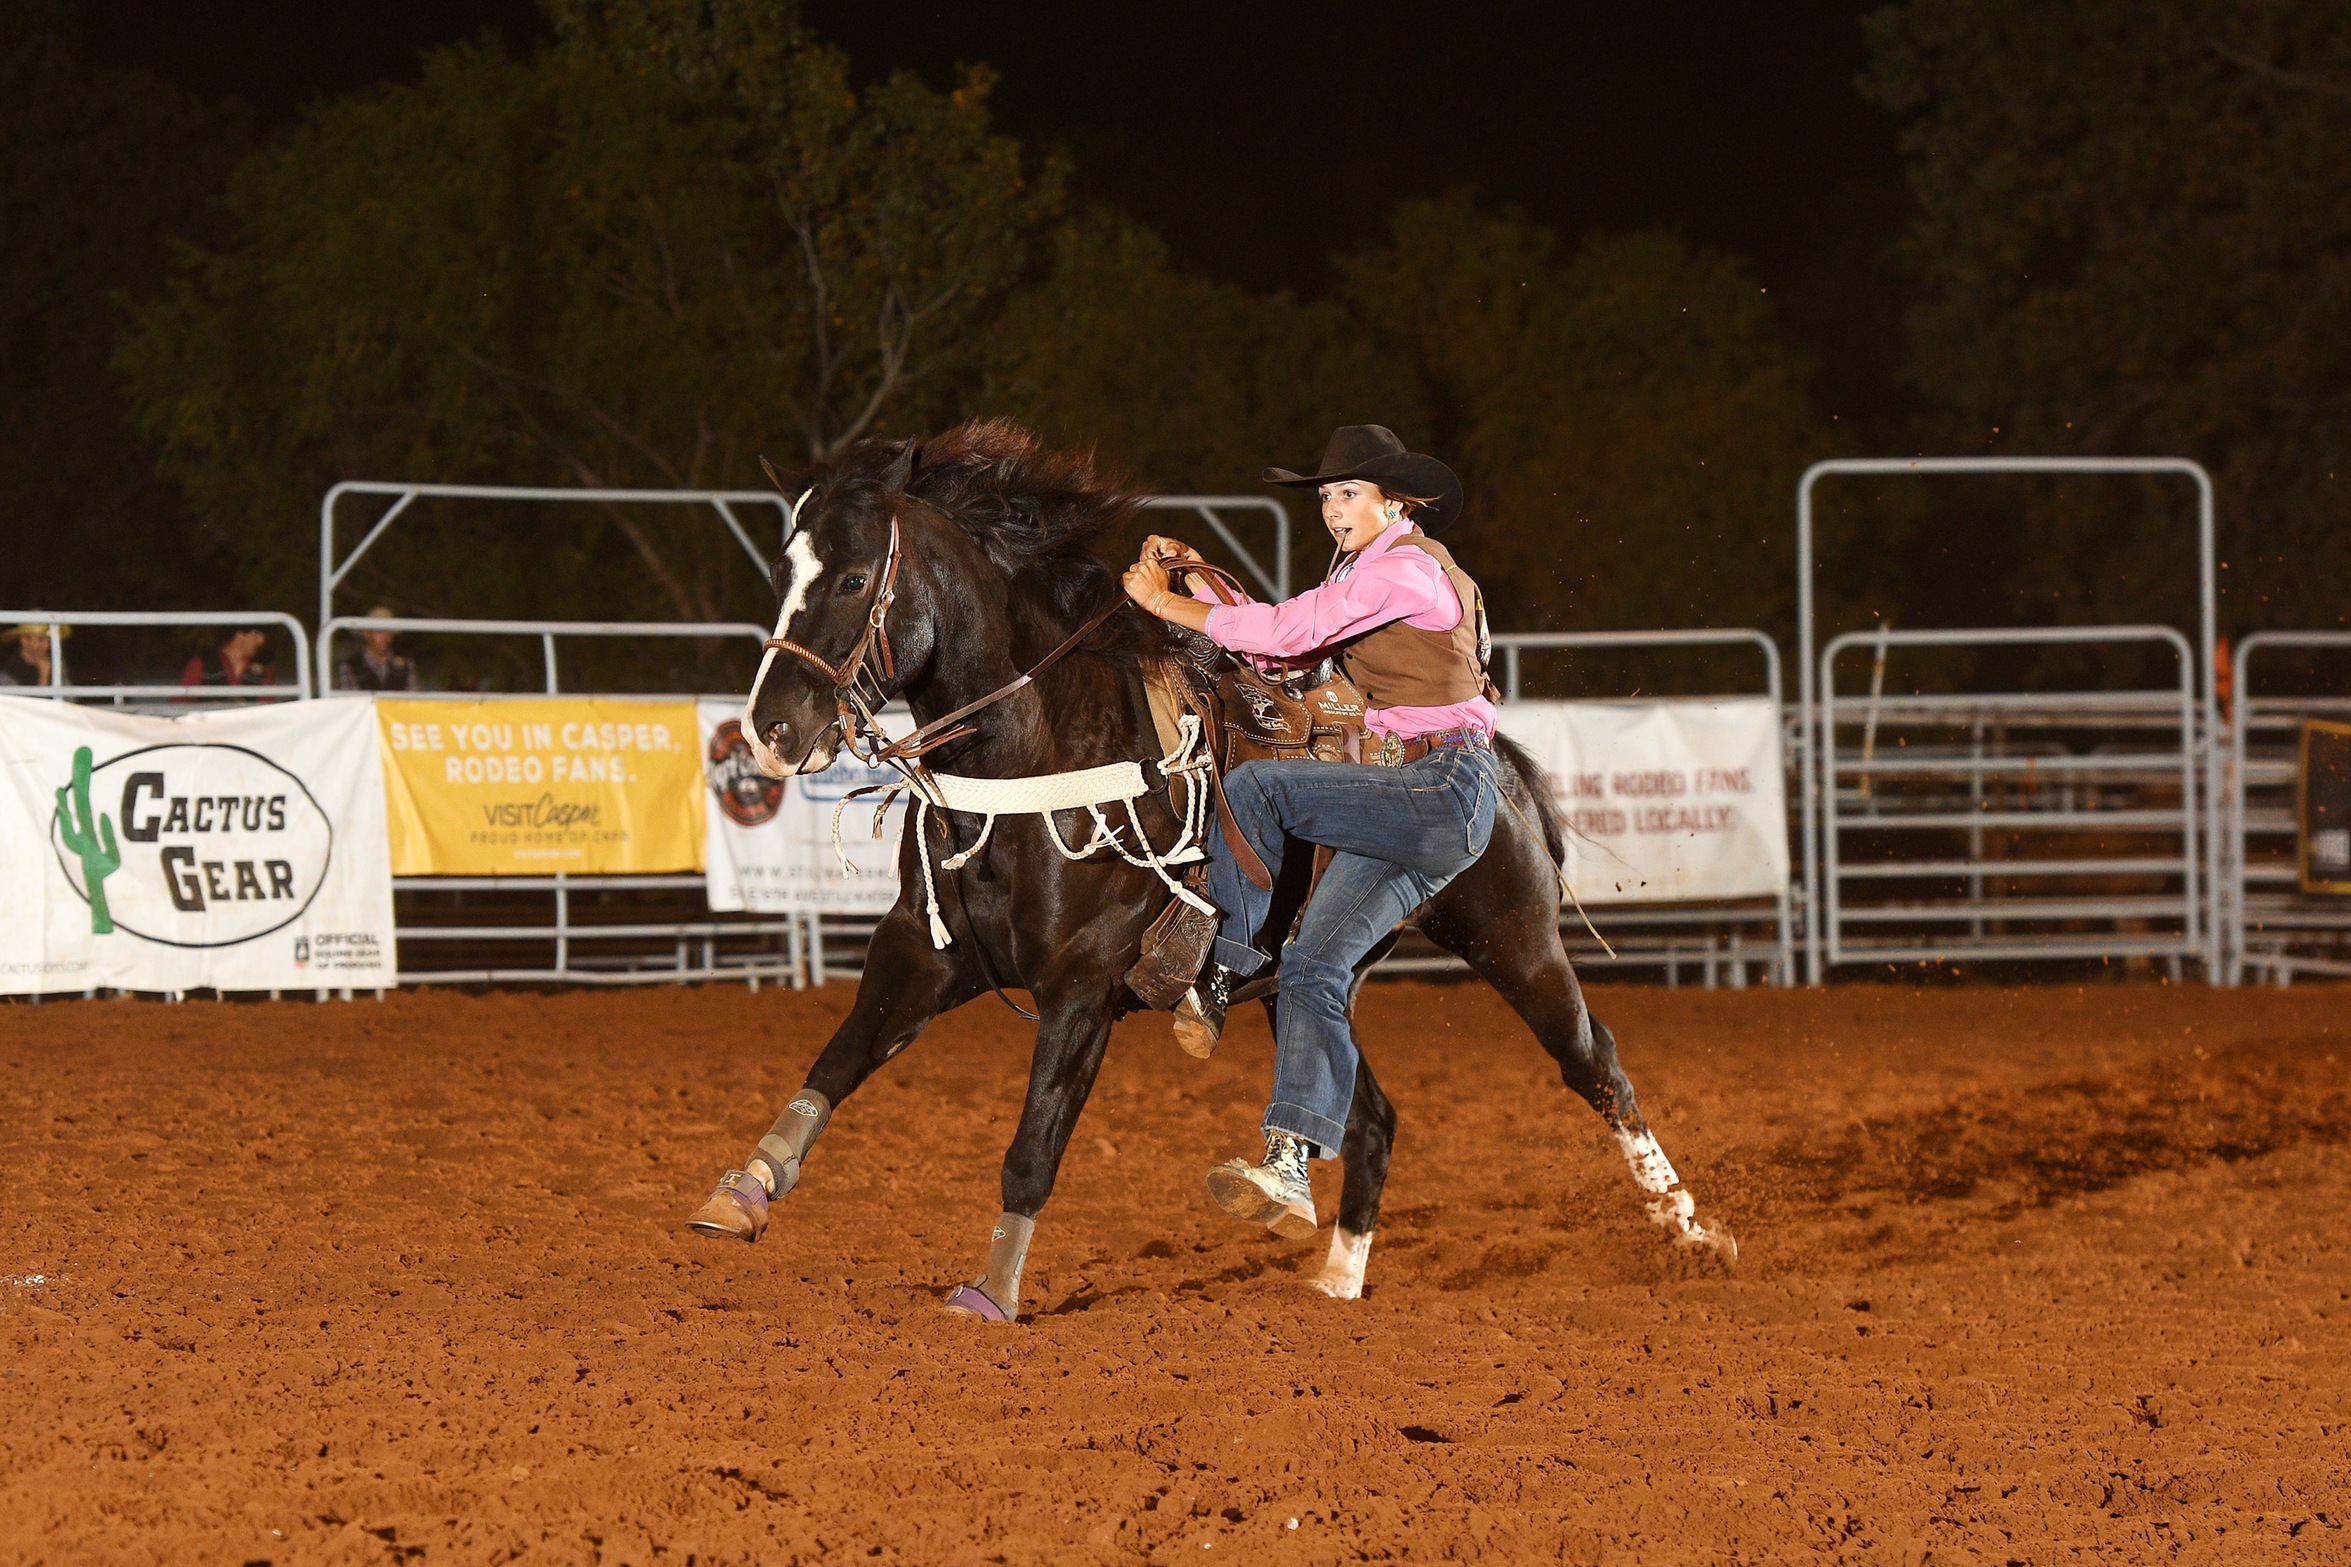 Broncbuster rodeo competes at Oklahoma State